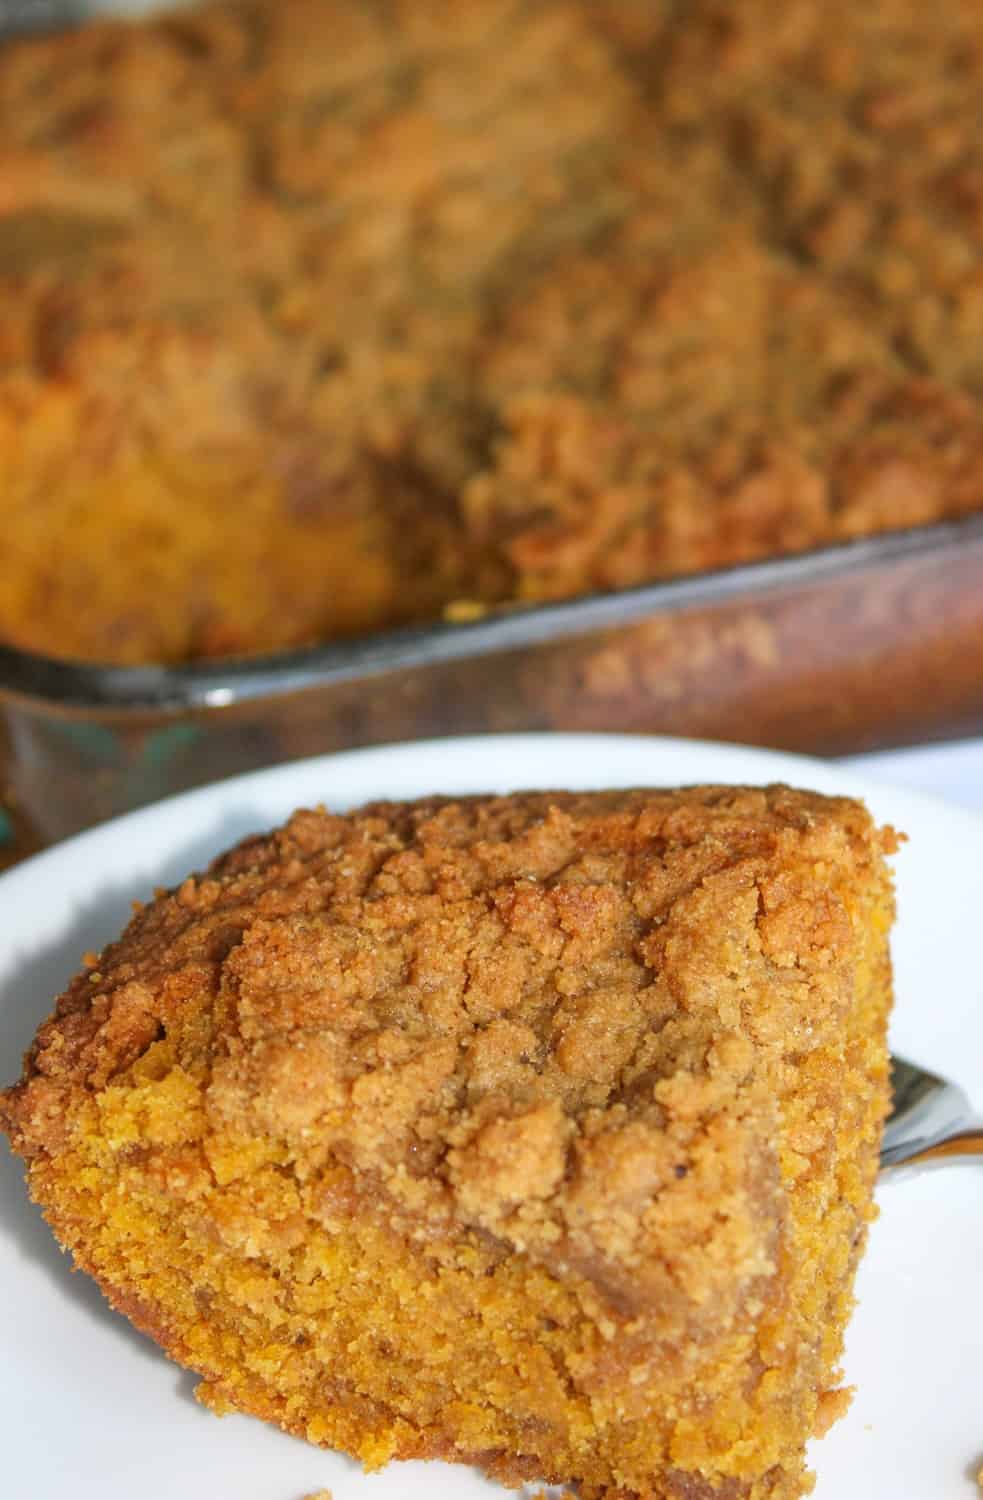 At this time of year I can never get tired of the warmth and coziness that is associated with pumpkin spices.  This Pumpkin Streusel Coffee Cake provides another opportunity to enjoy these fall spices.